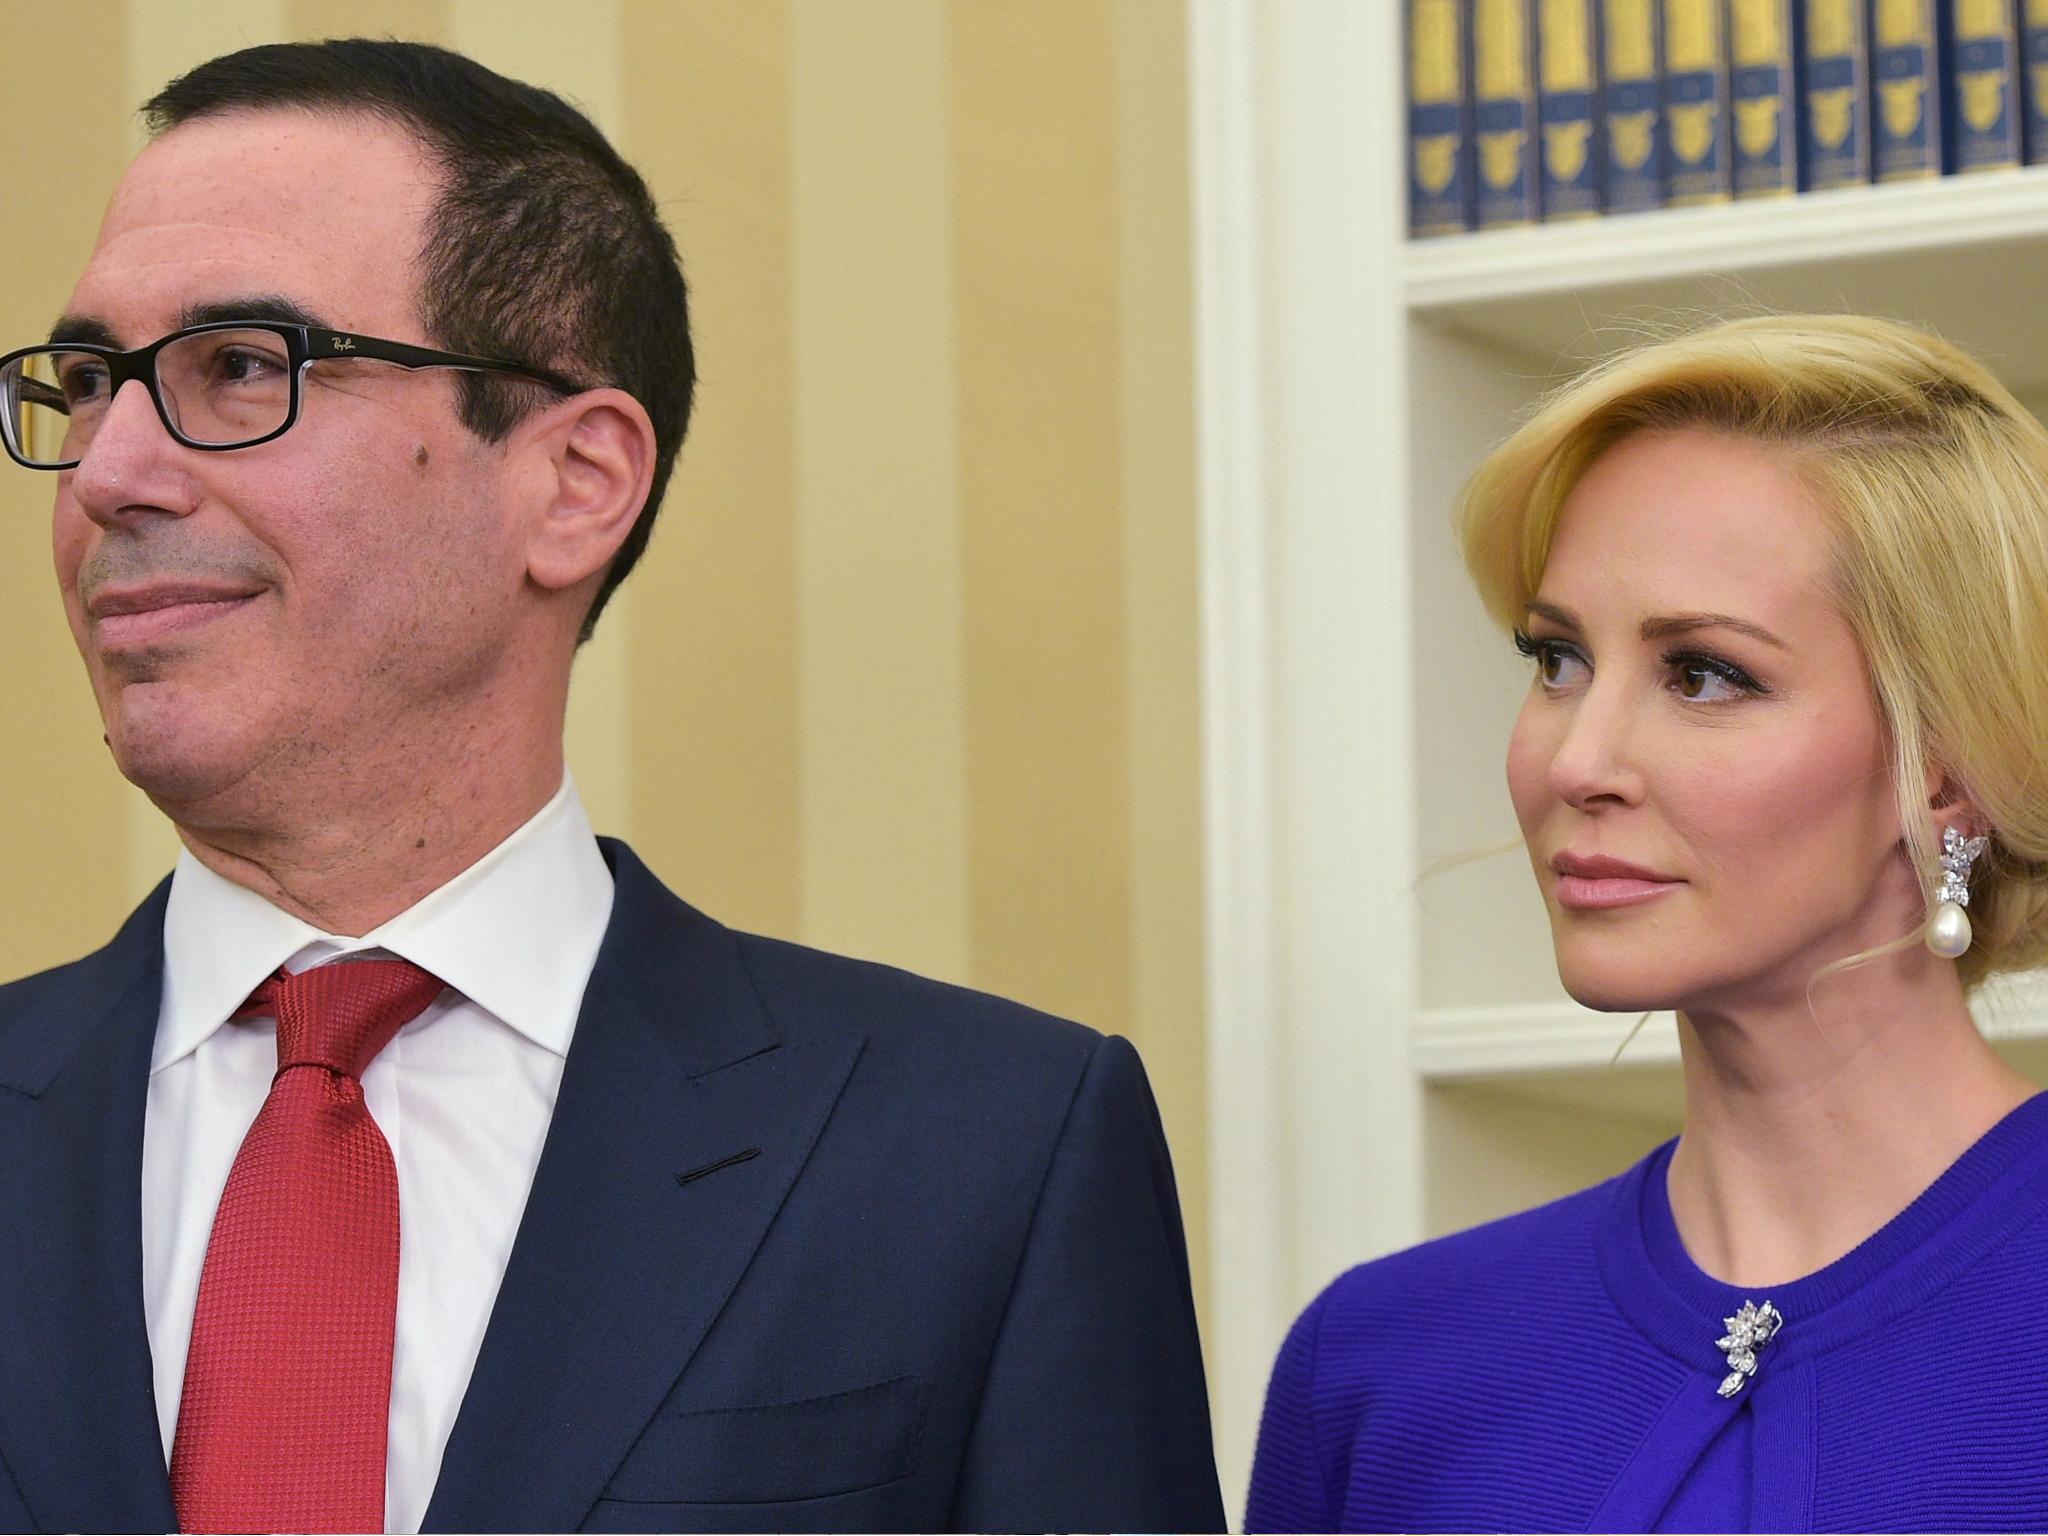 Treasury Secretary Steve Mnuchin and wife Louise Linton may have used taxpayer money for a personal trip to view the solar eclipse.